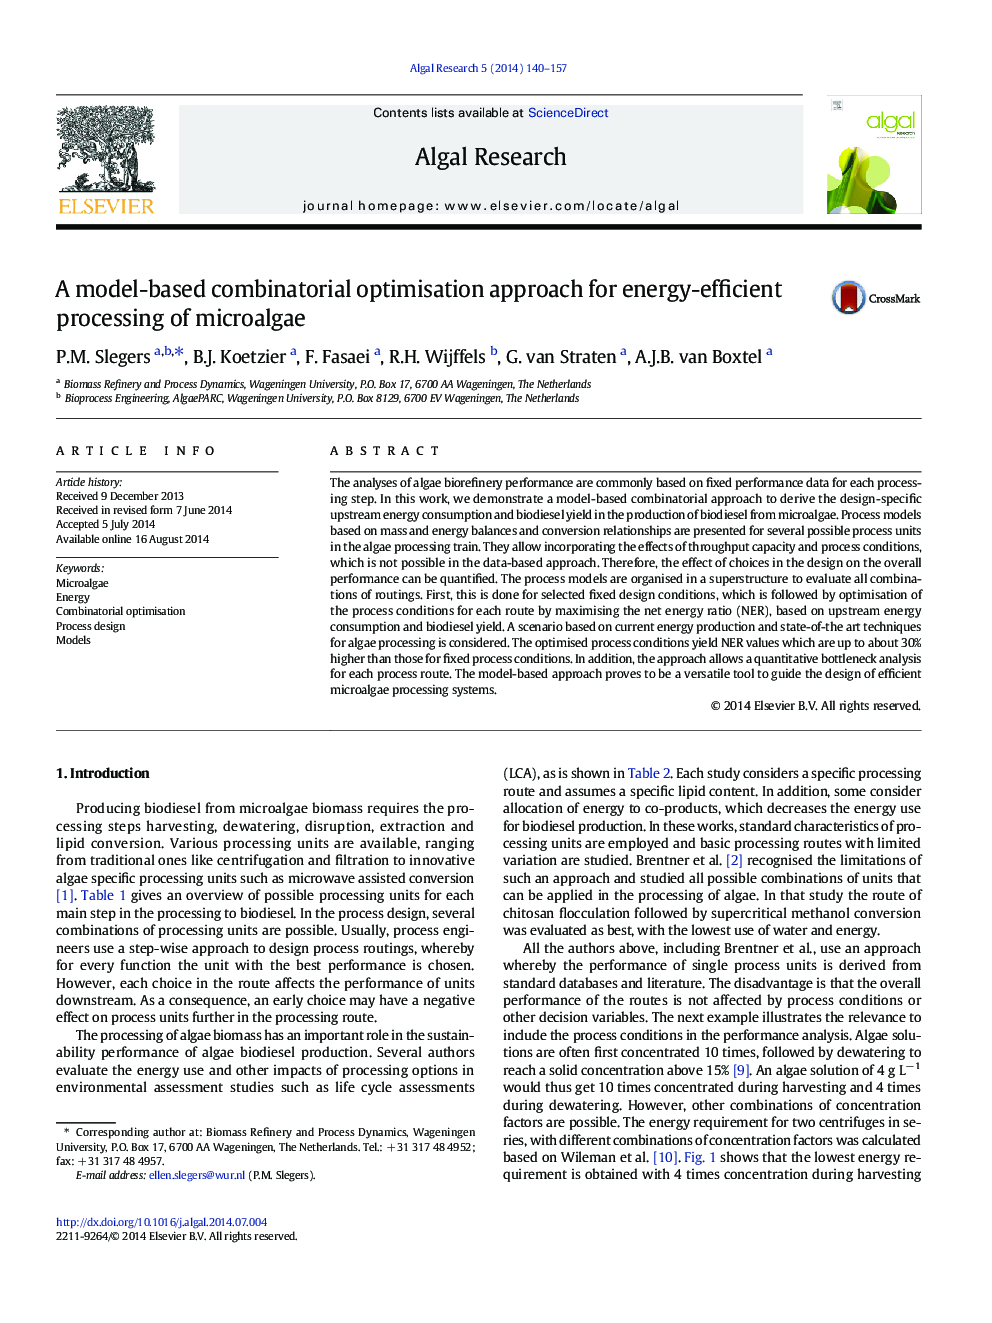 A model-based combinatorial optimisation approach for energy-efficient processing of microalgae